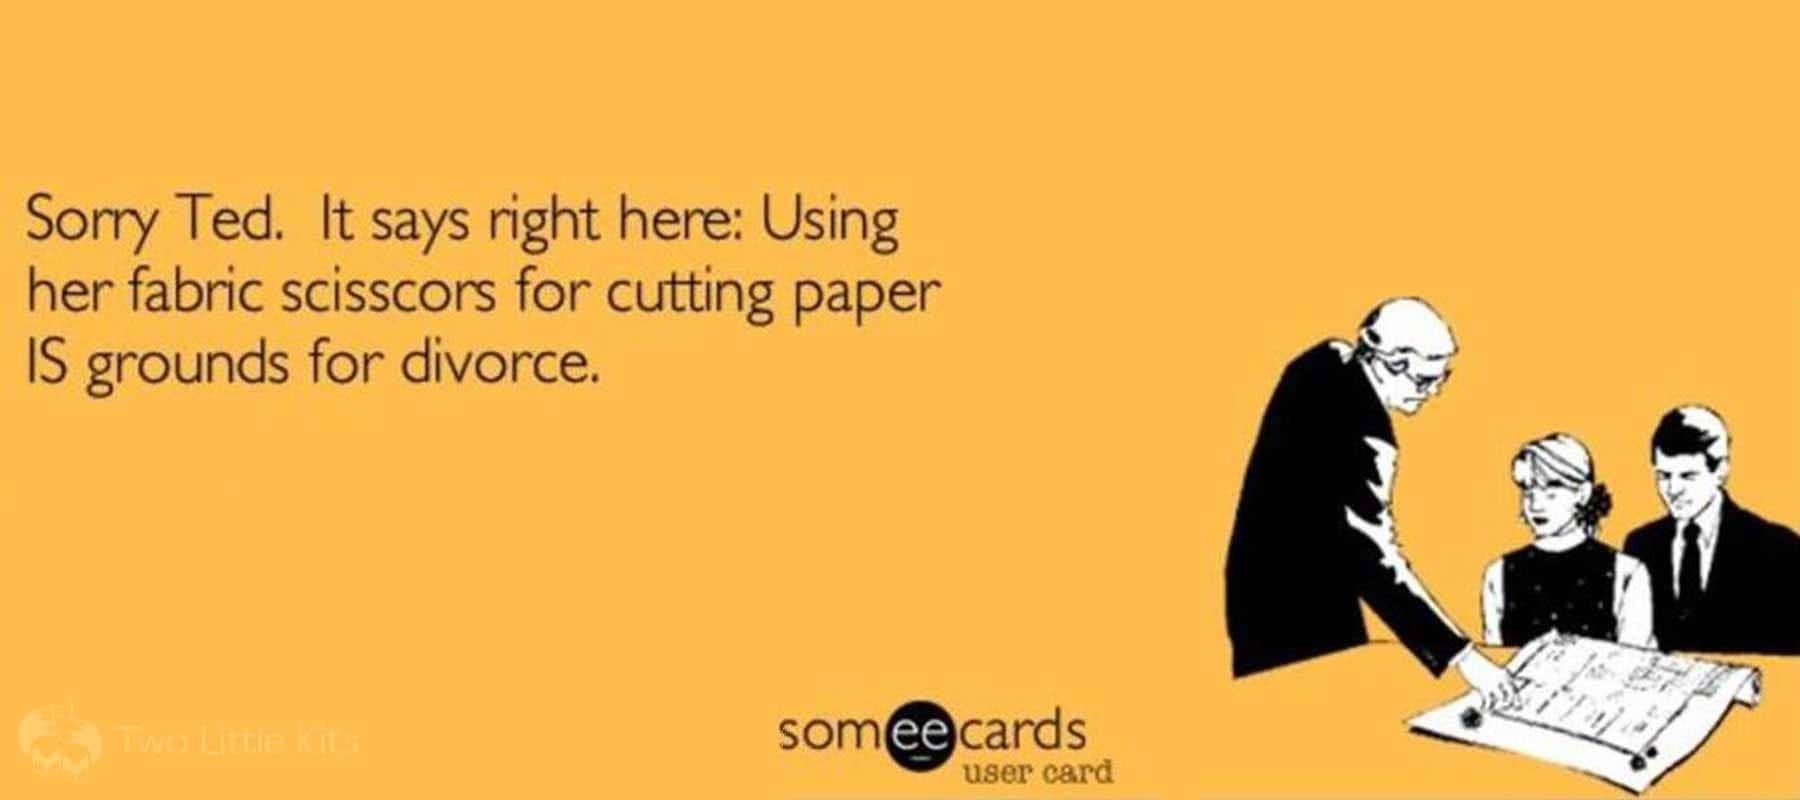 How to Care for your Craft Scissors - Shiny Happy World